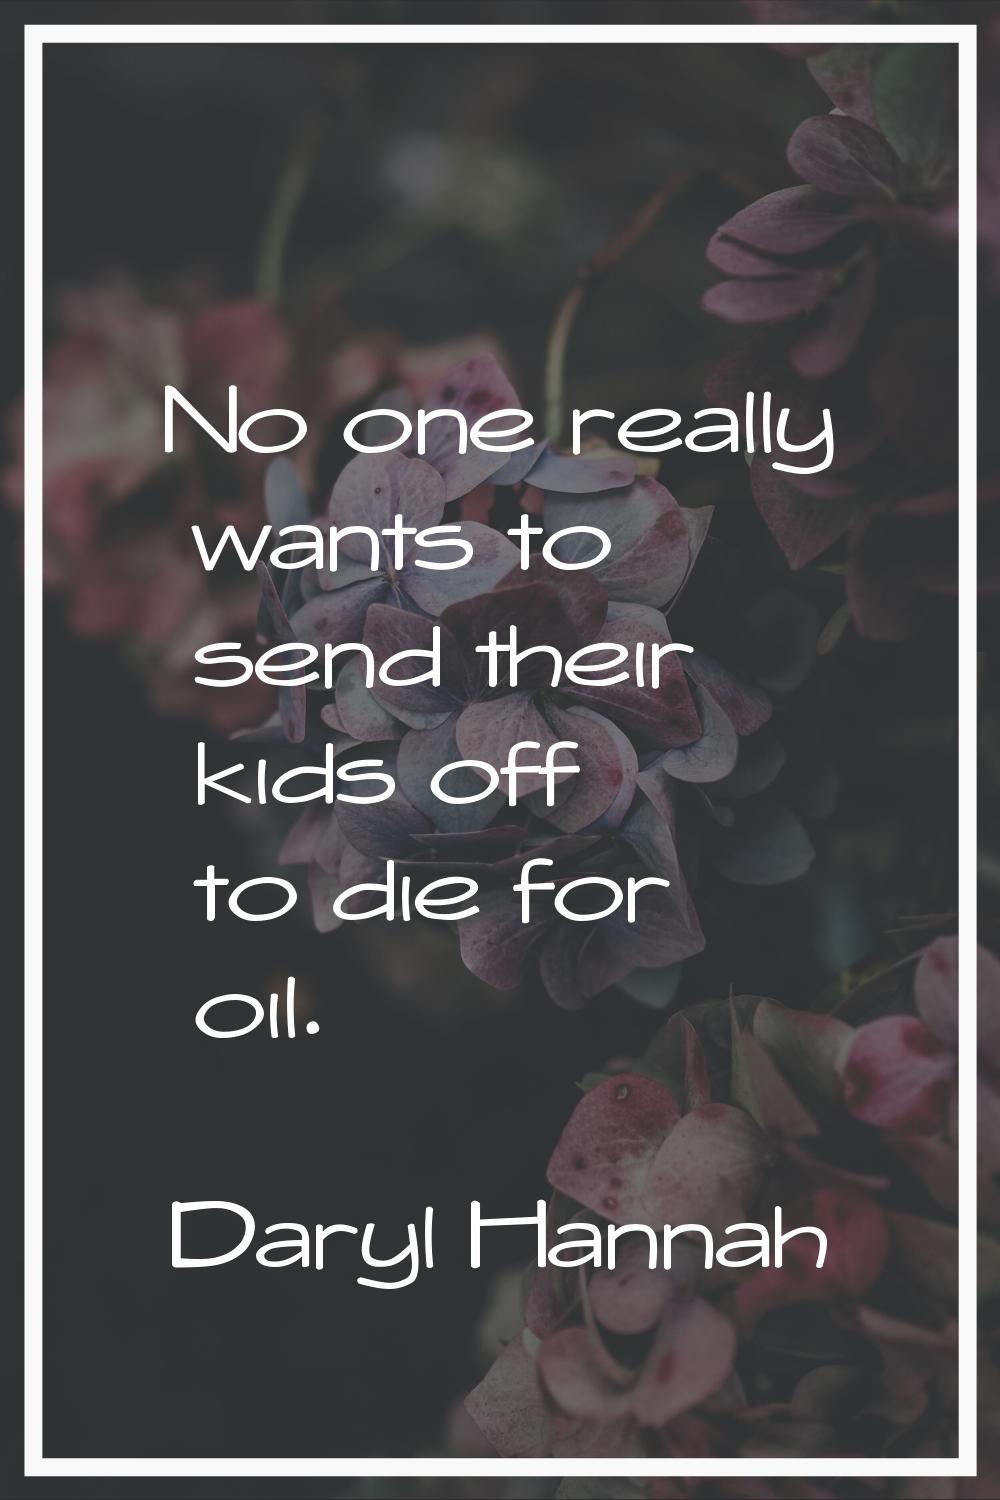 No one really wants to send their kids off to die for oil.